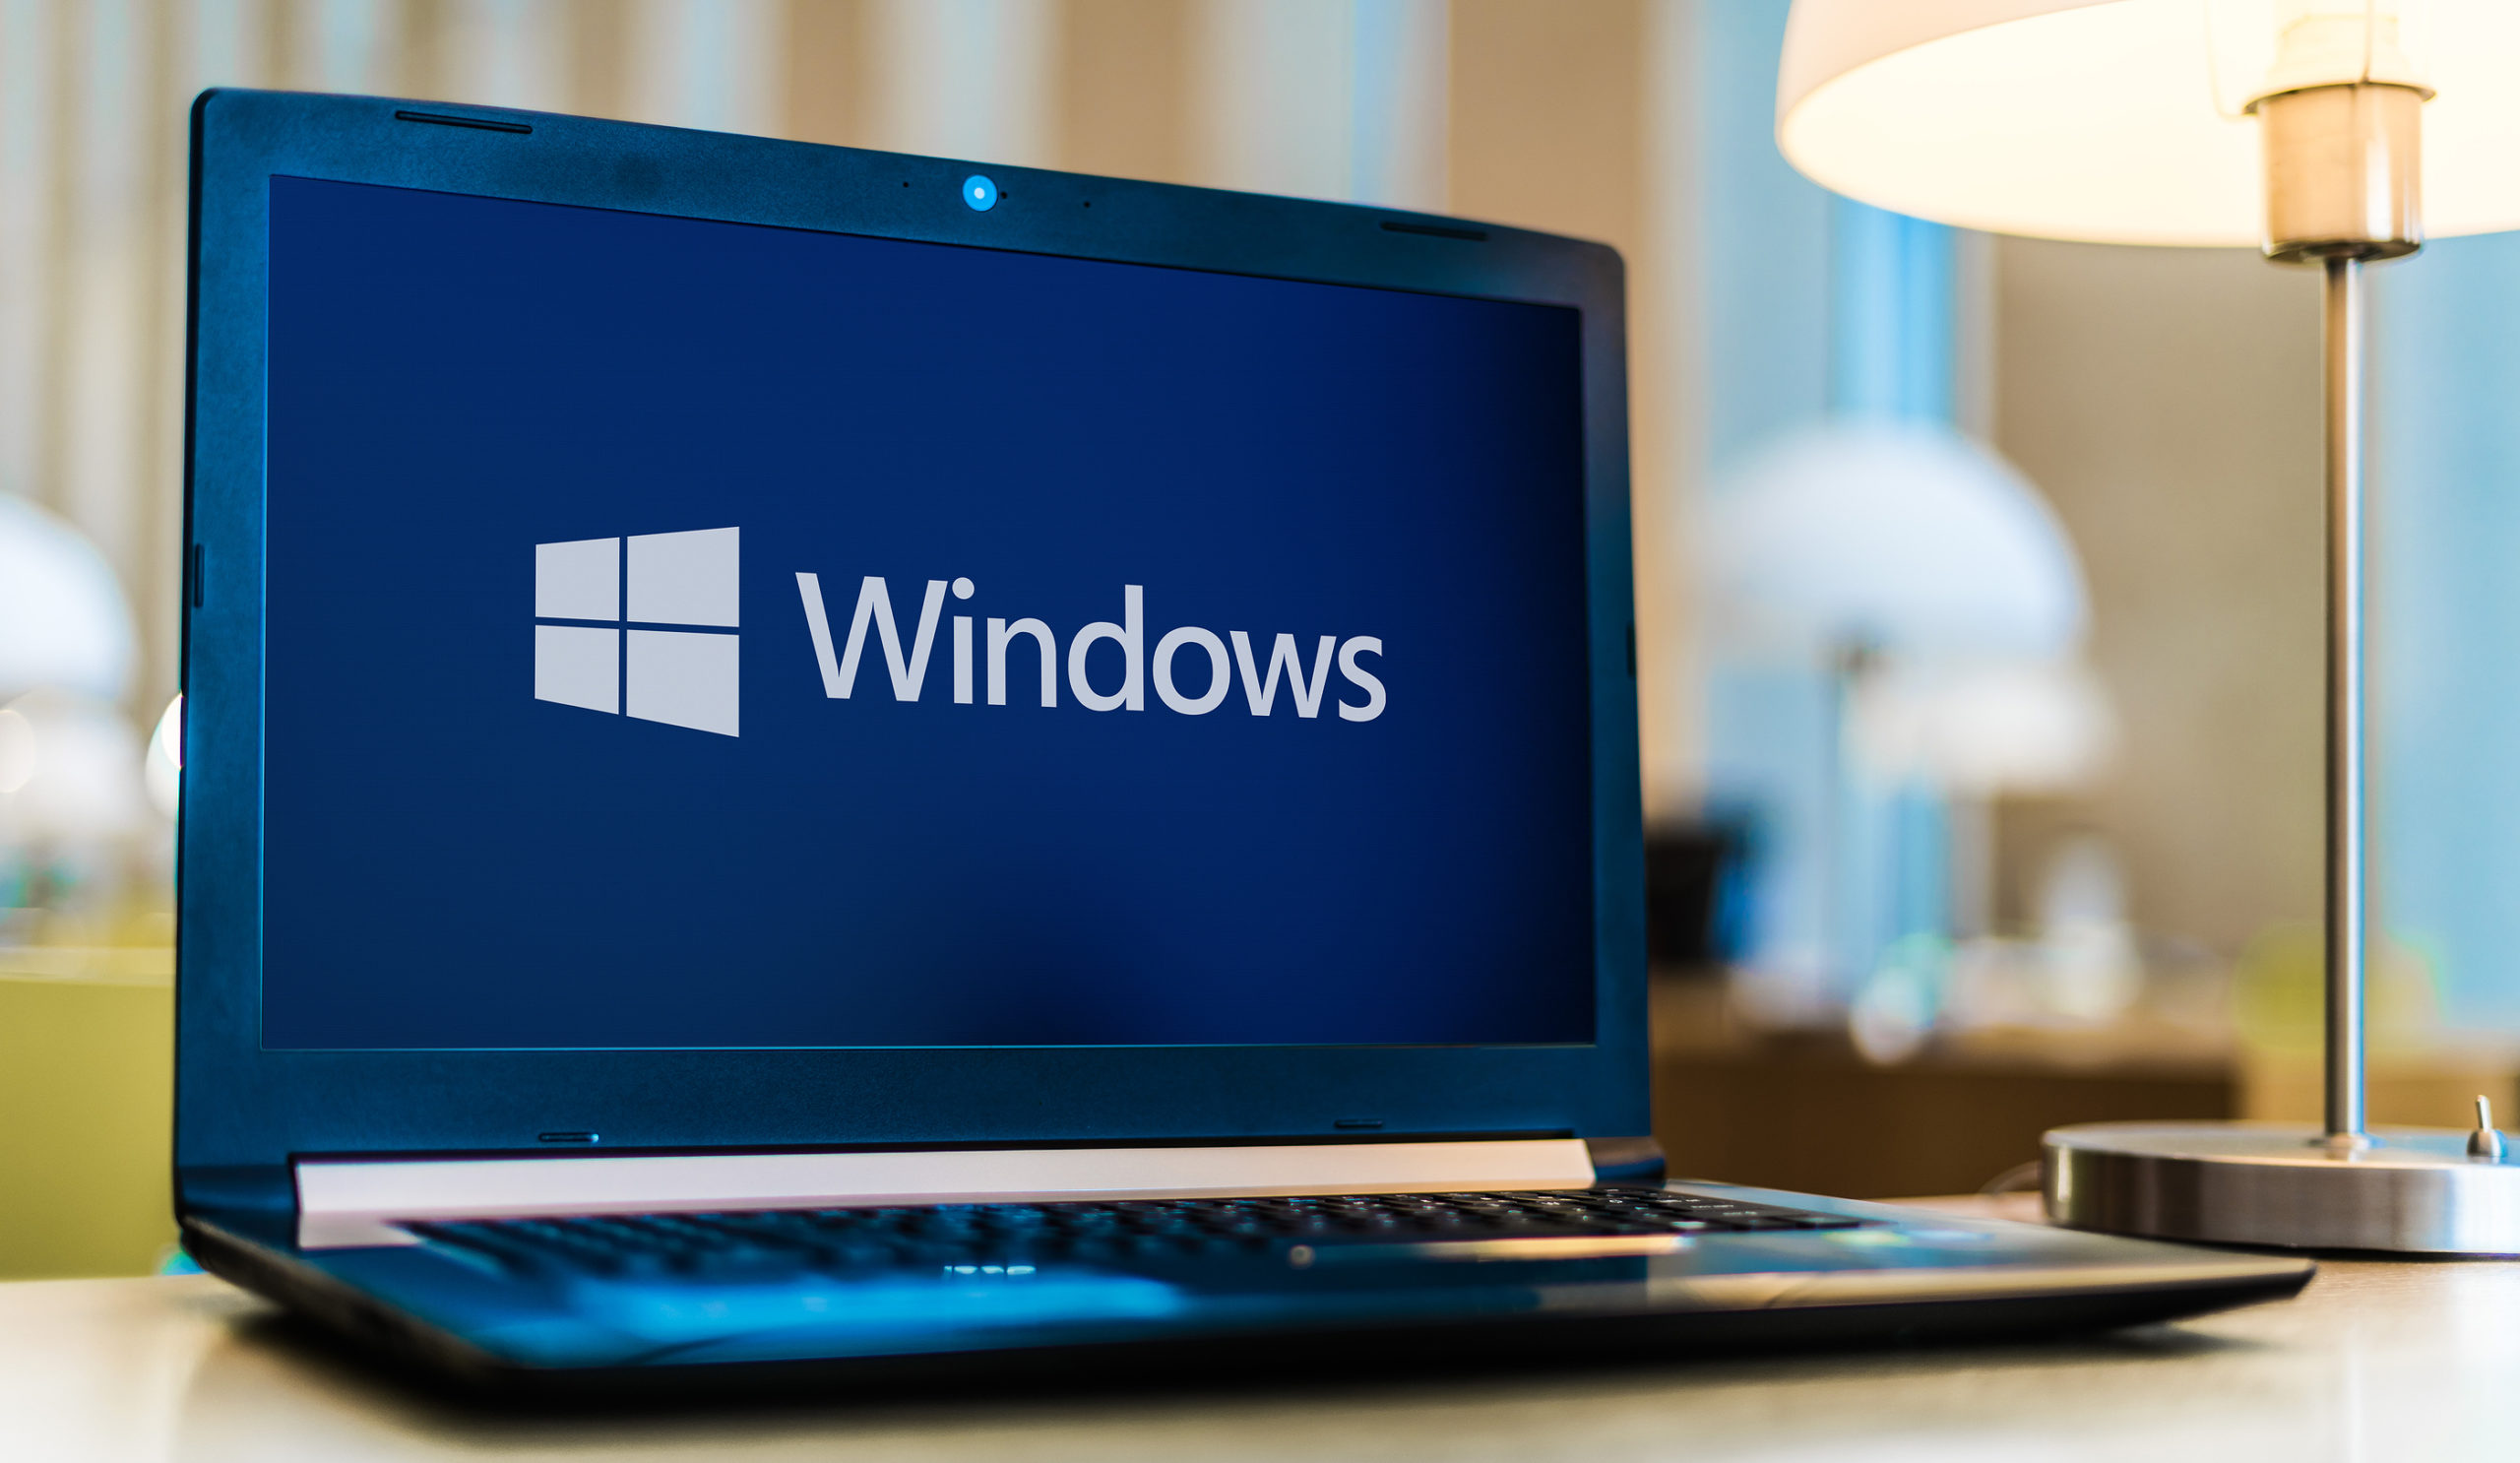 What We Know So Far About Windows 11 & How It Will Impact Your Business